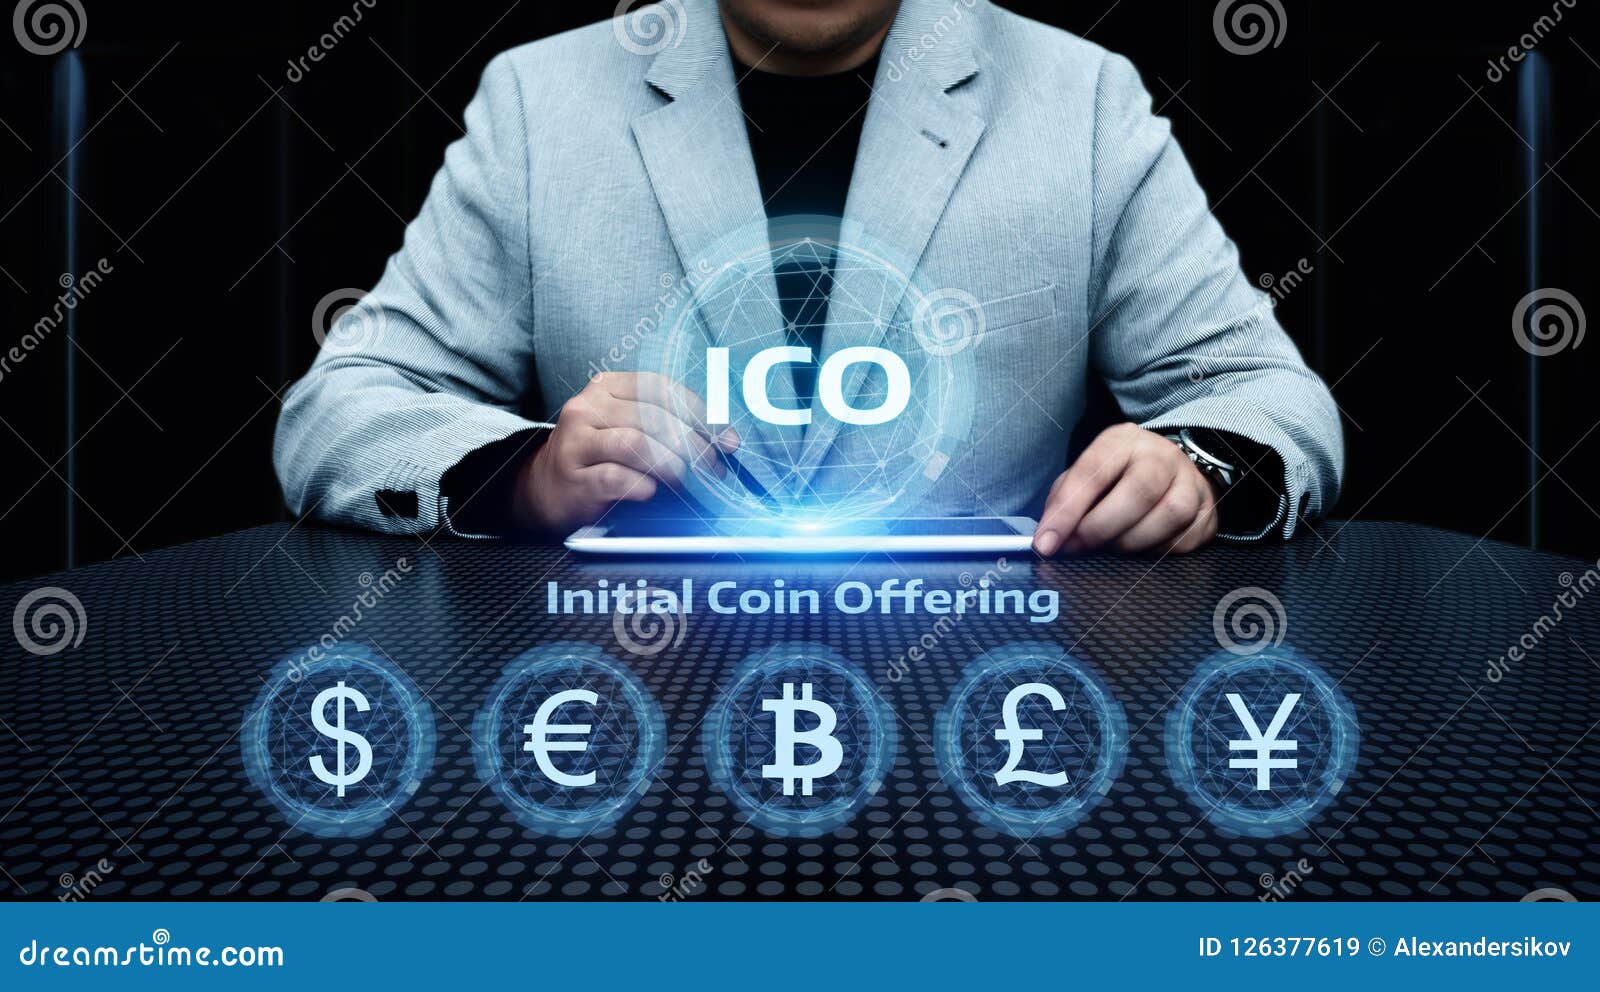 ico initial coin offering business internet technology concept